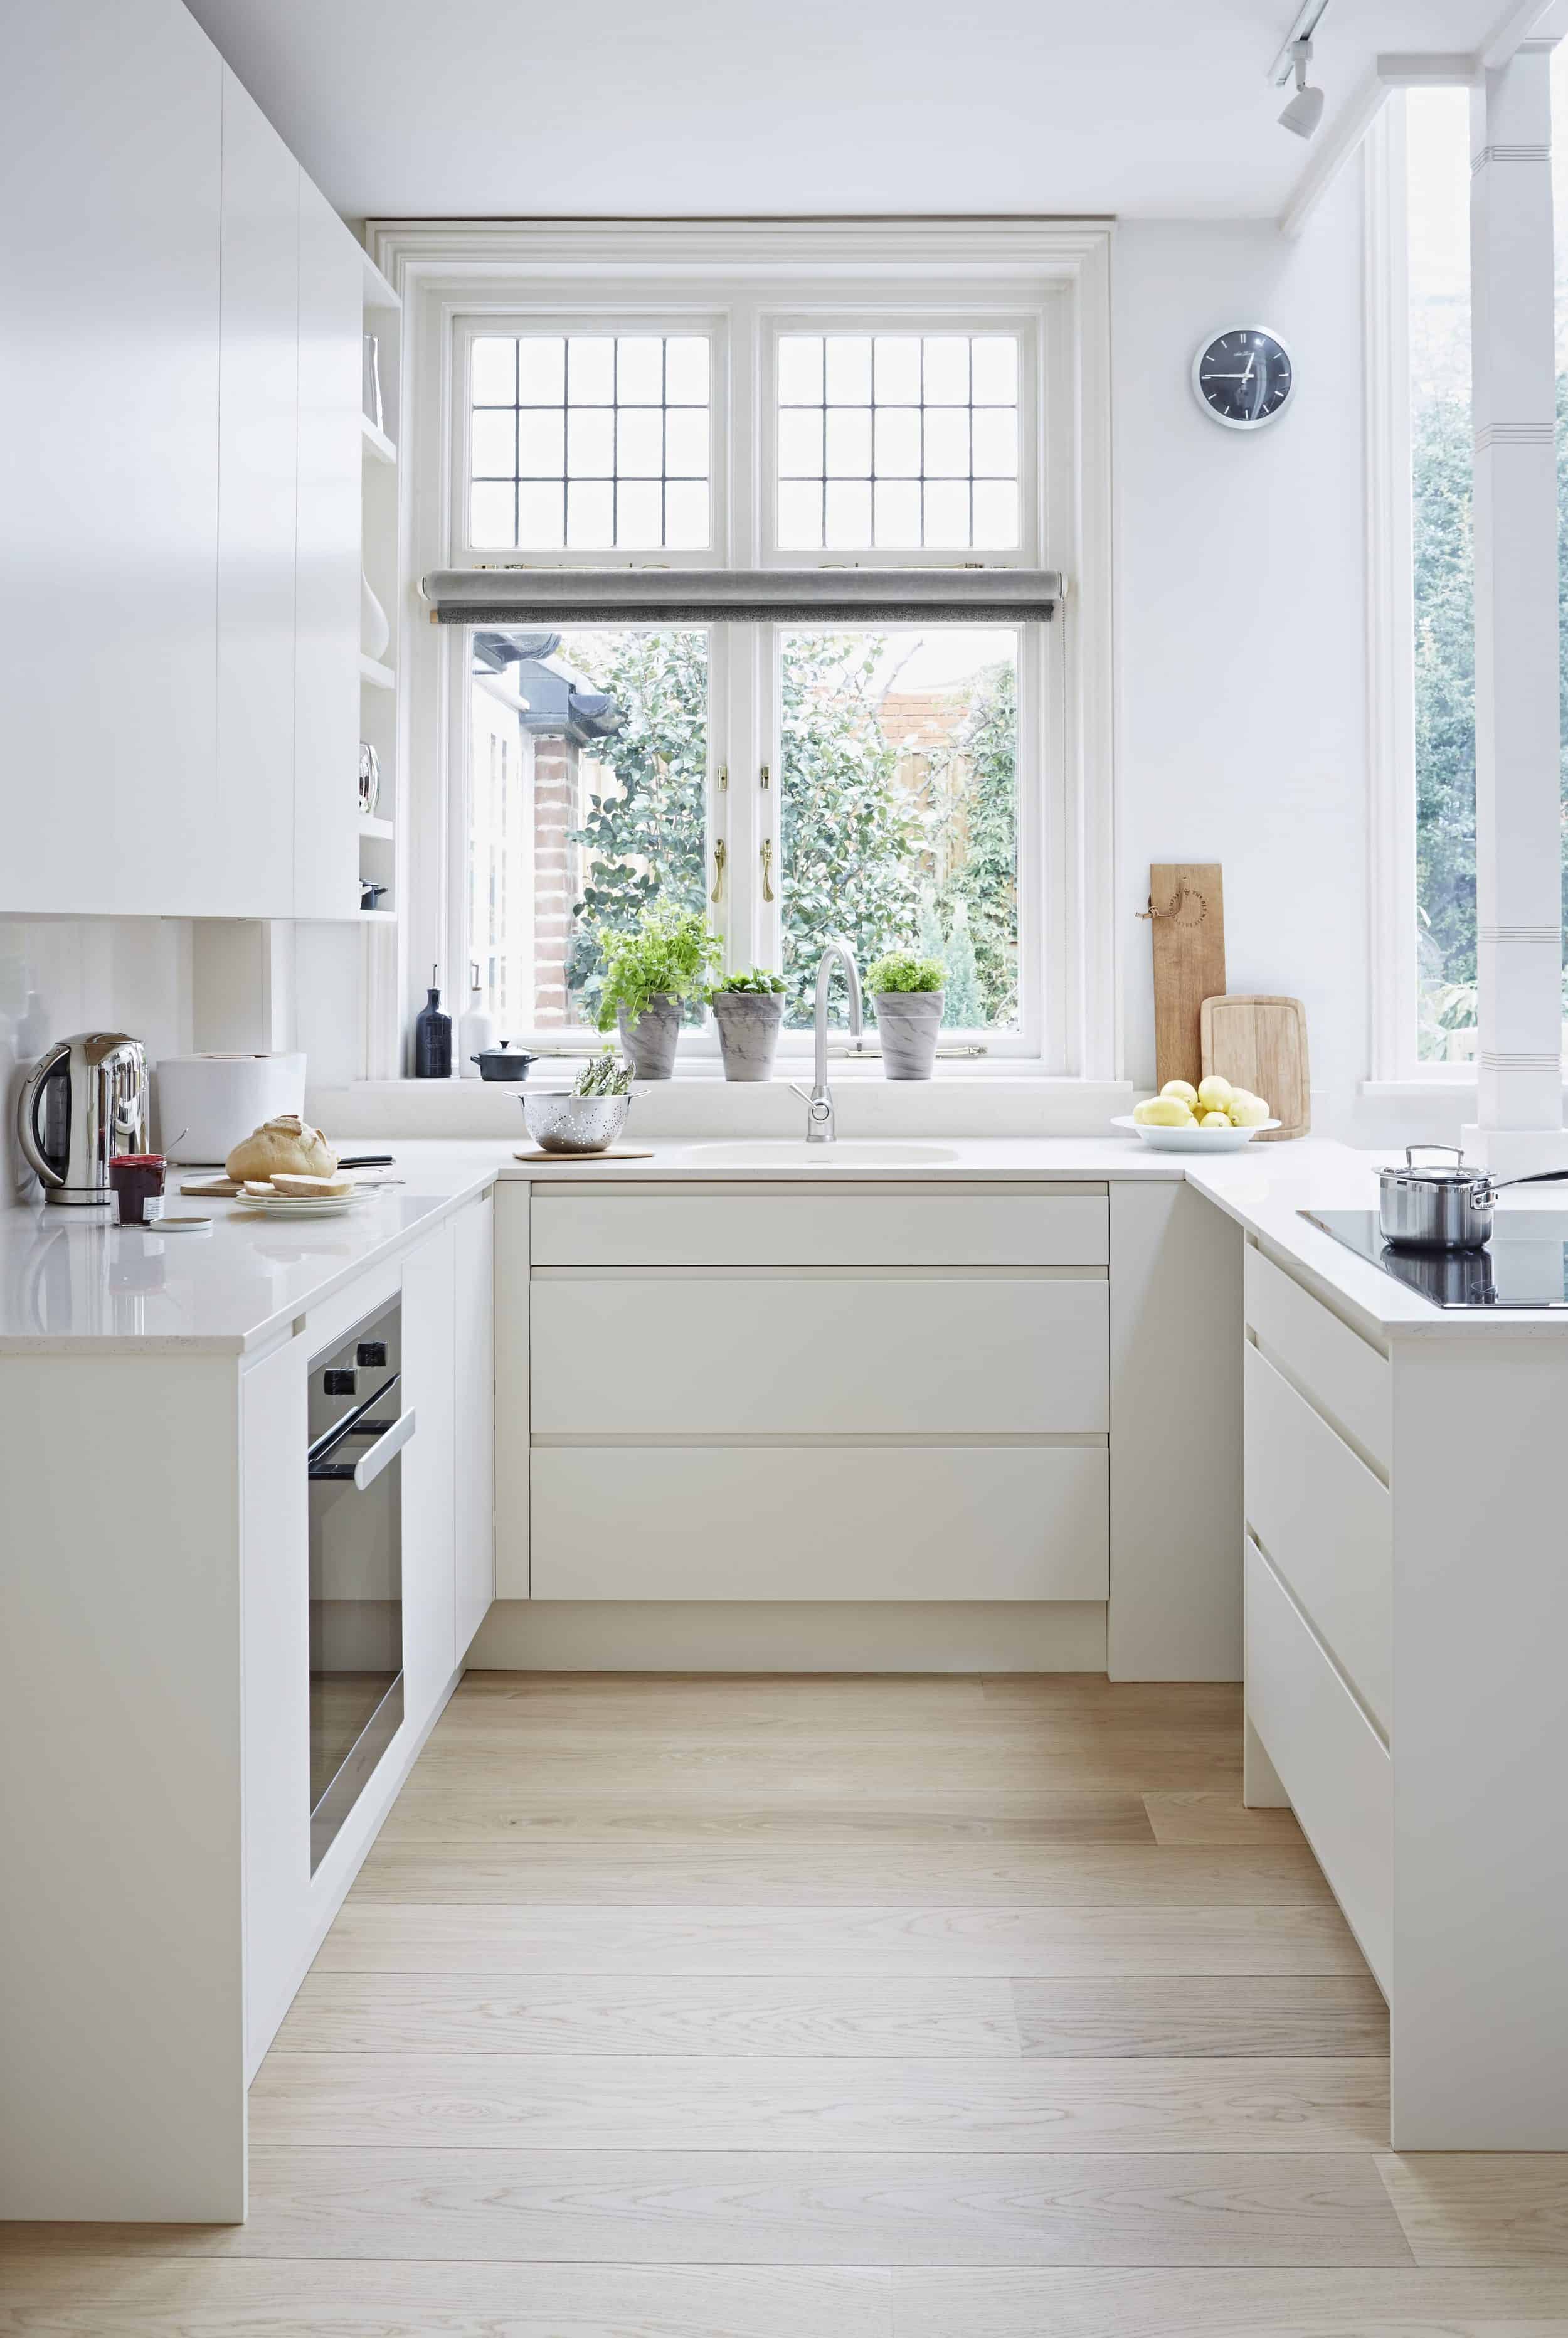 20 Simple Ways to Make Your Small Kitchen Feel Larger